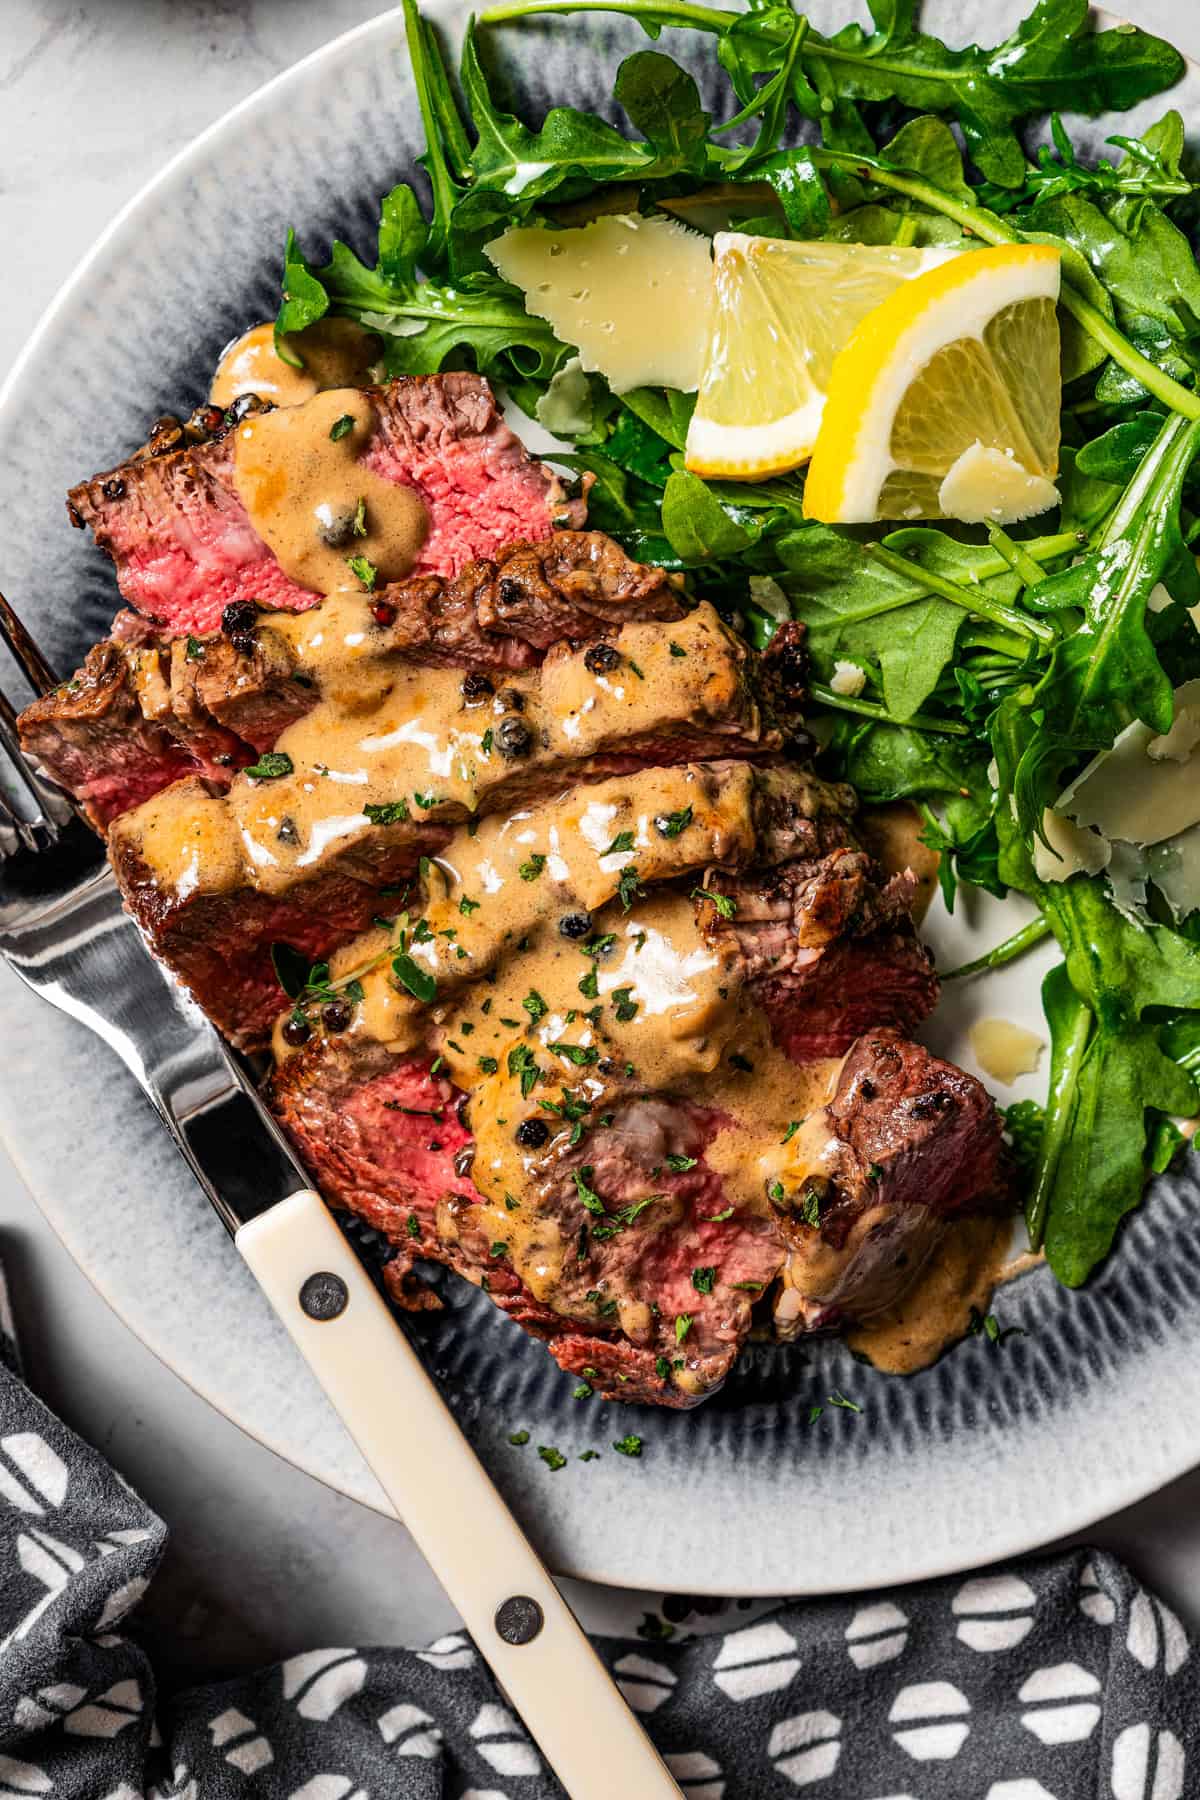 Sliced steak au poivre drizzled with cognac sauce is served on a plate next to a serving of green salad garnished with lemon wedges, and a fork is placed on the side.